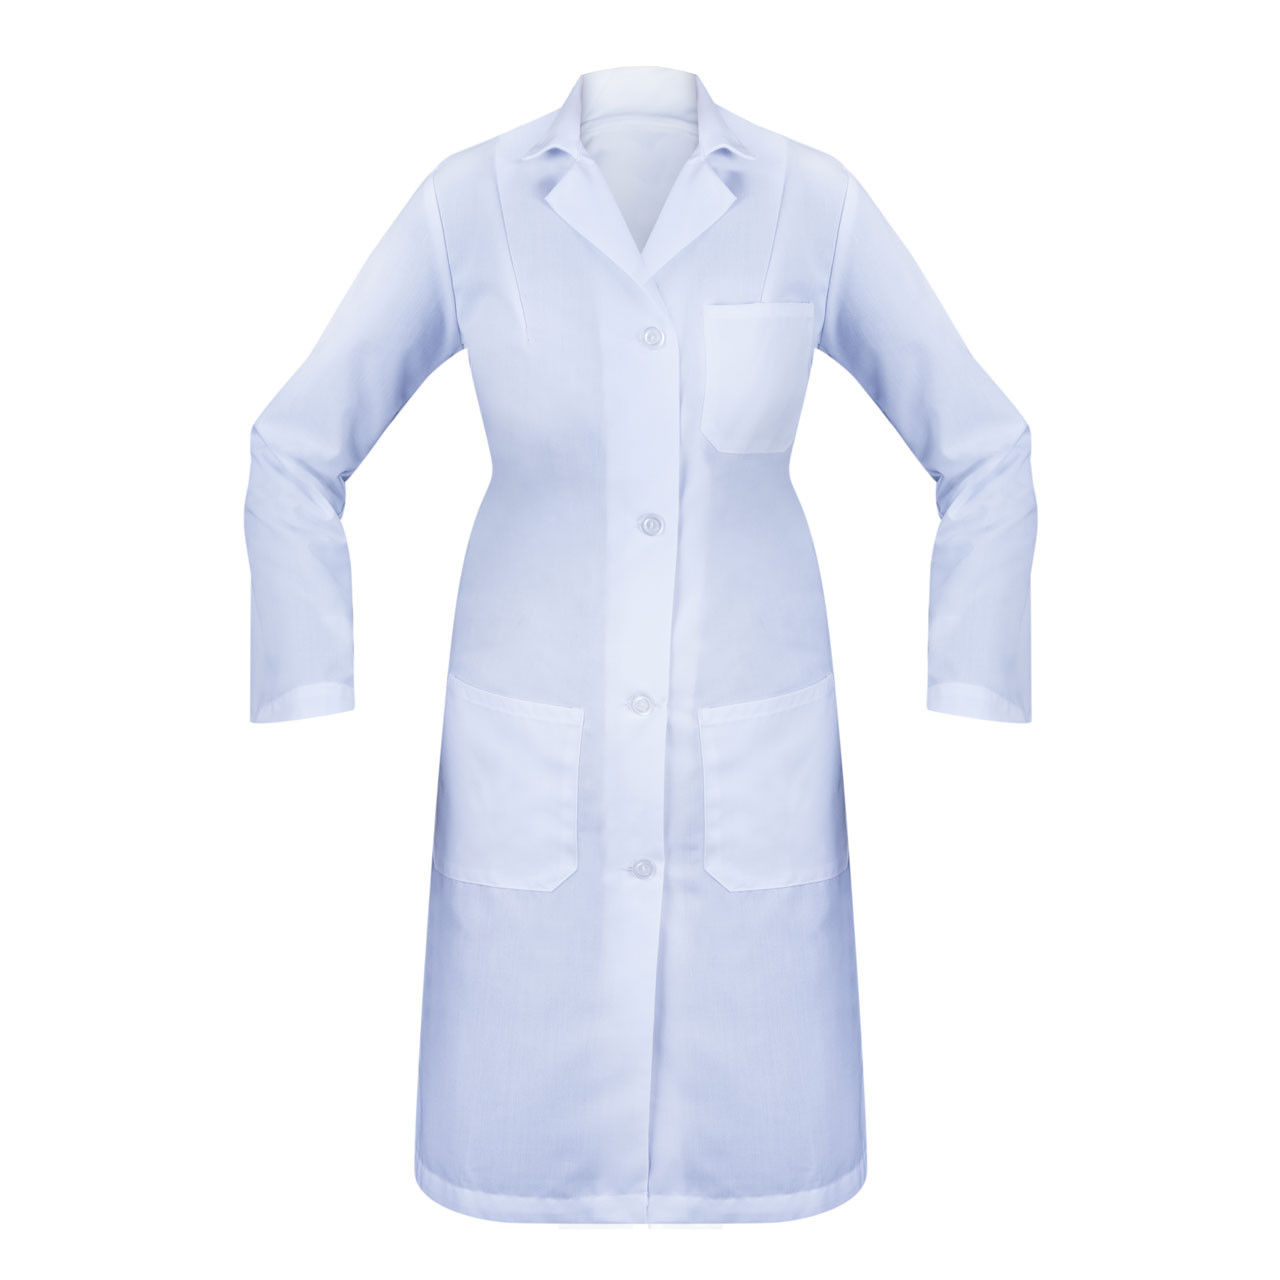 What is the sleeve length of the Female Lab Coat?